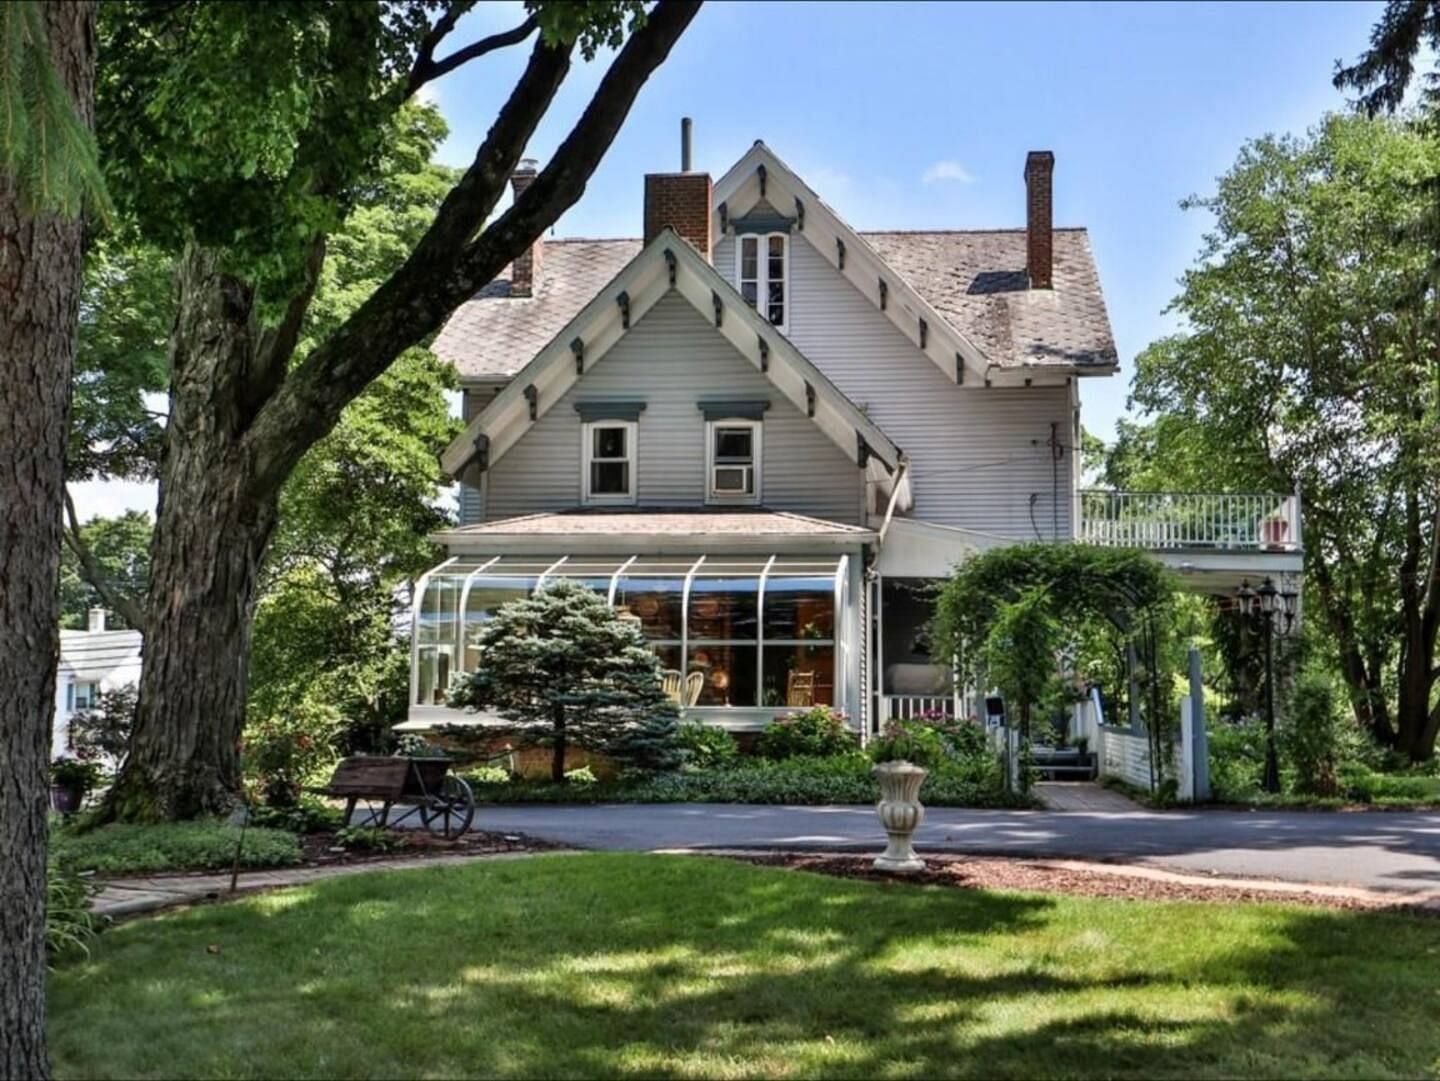 JWguest House at Chester, New York | Victorian Style Historic Home |  2pax #5 | Jwbnb no brobnb 16